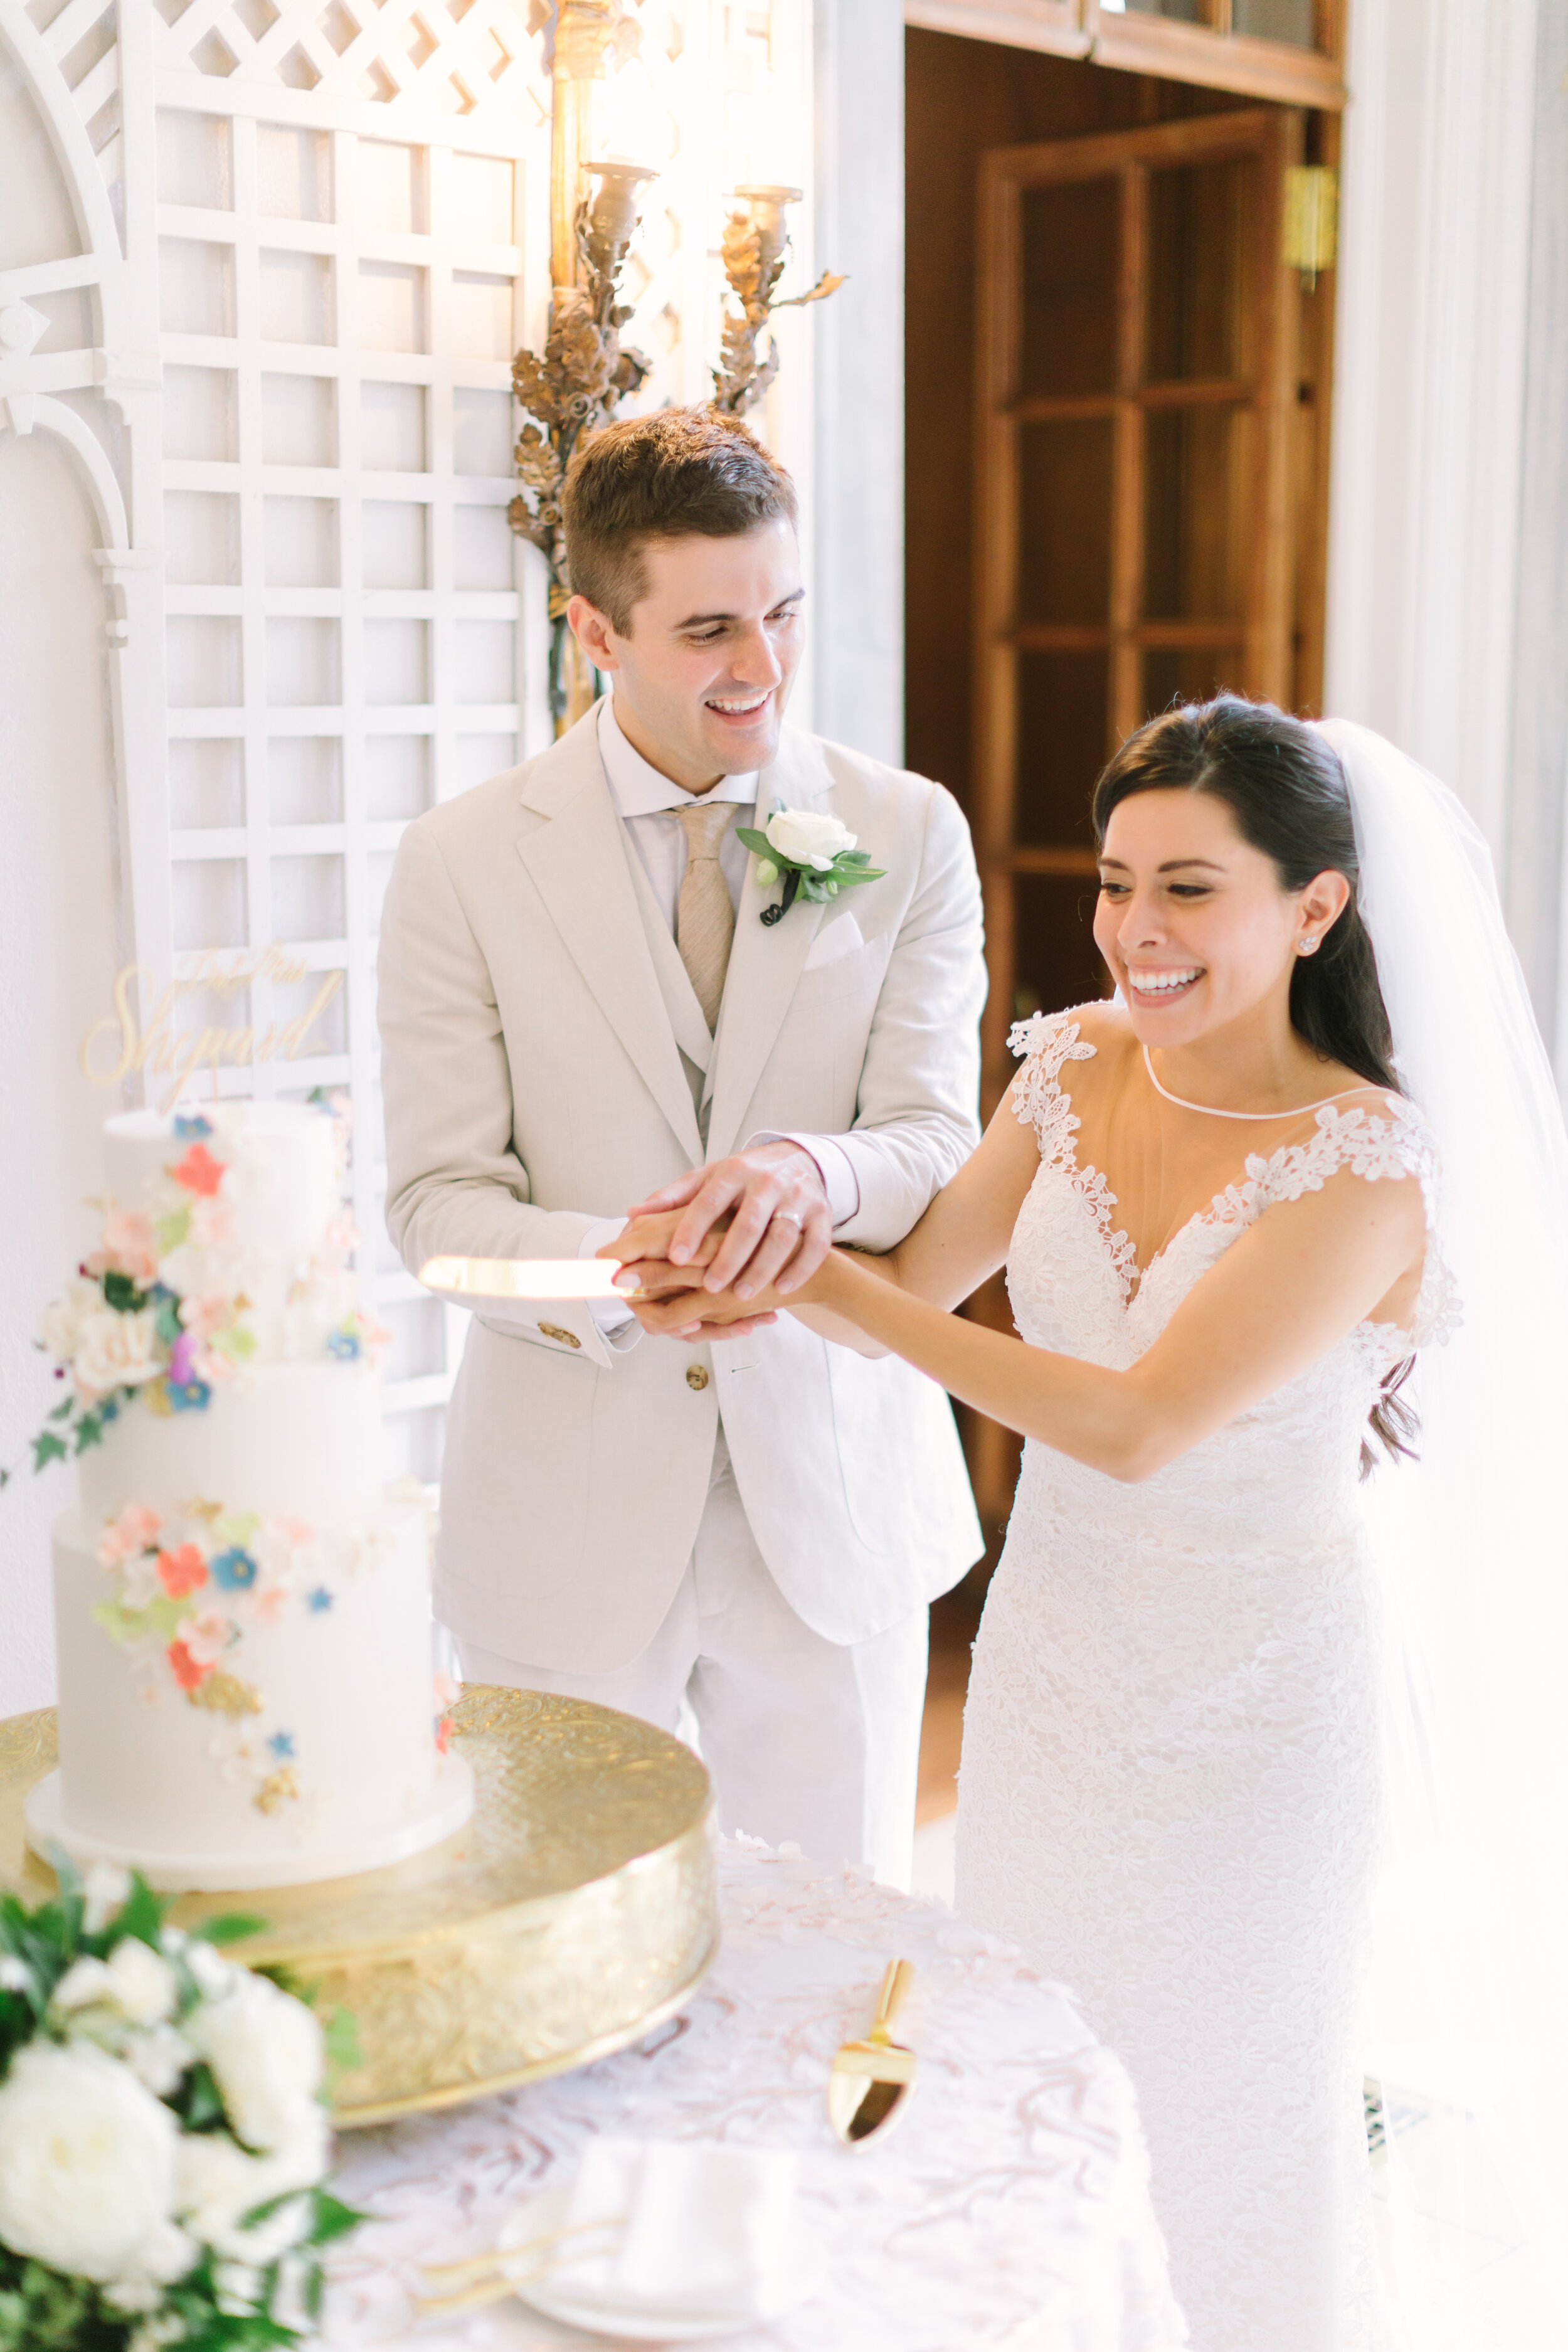 Floral-Filled Microwedding at Armour House captured by Tim Tam Studios